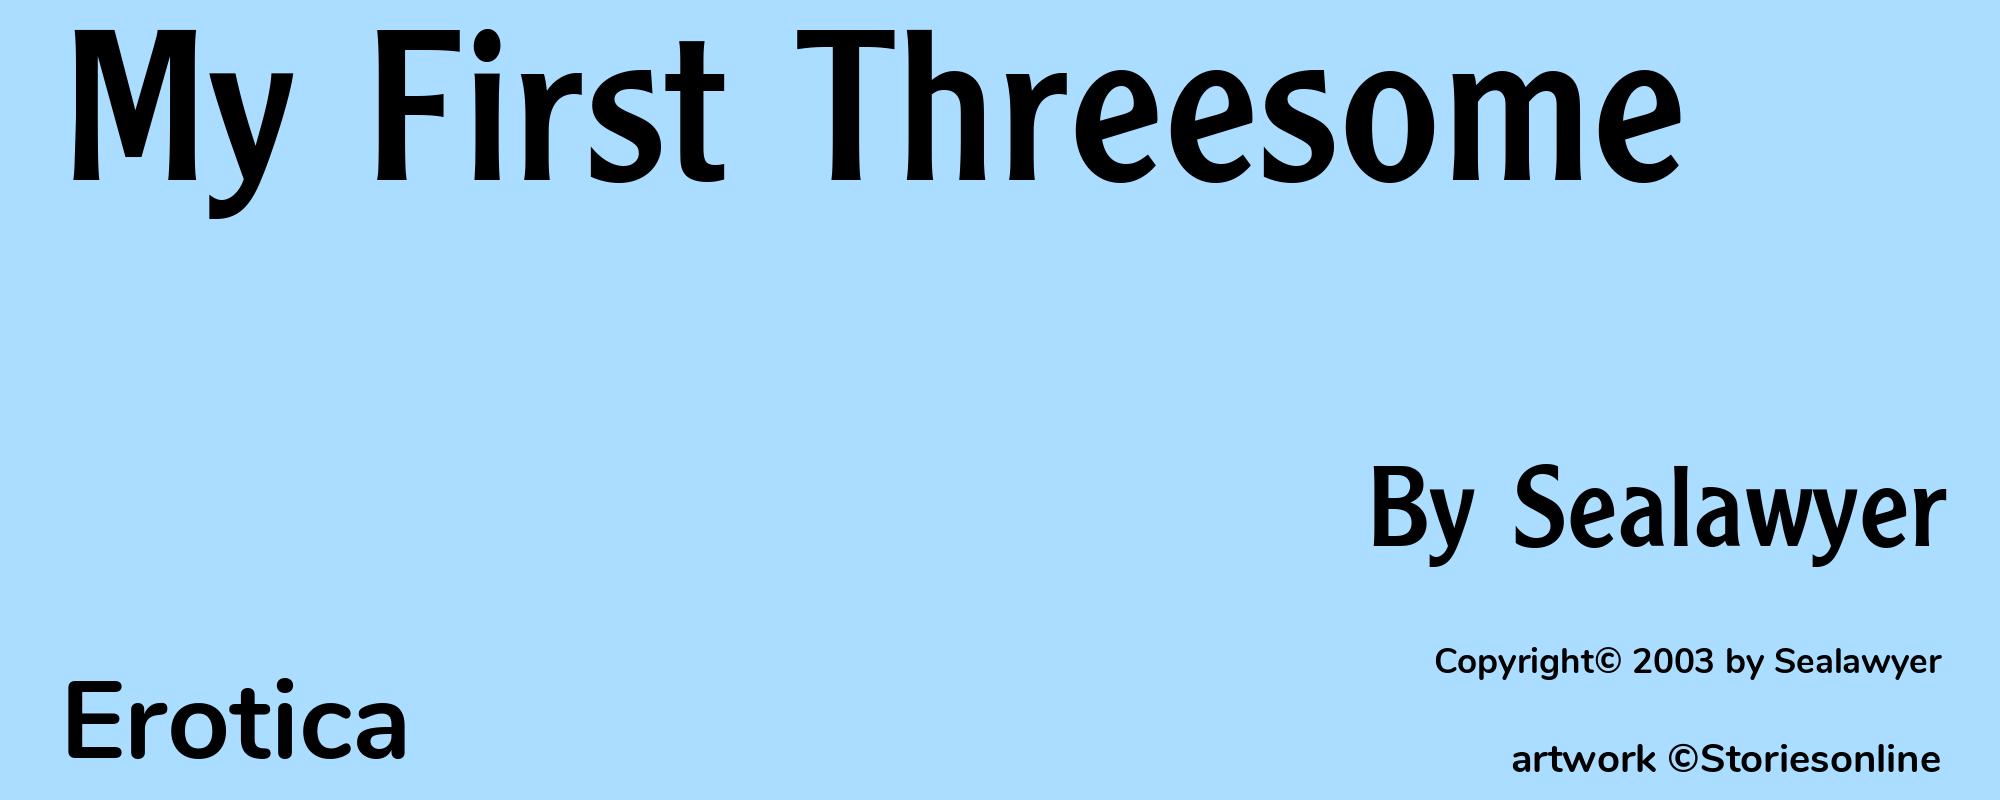 My First Threesome - Cover